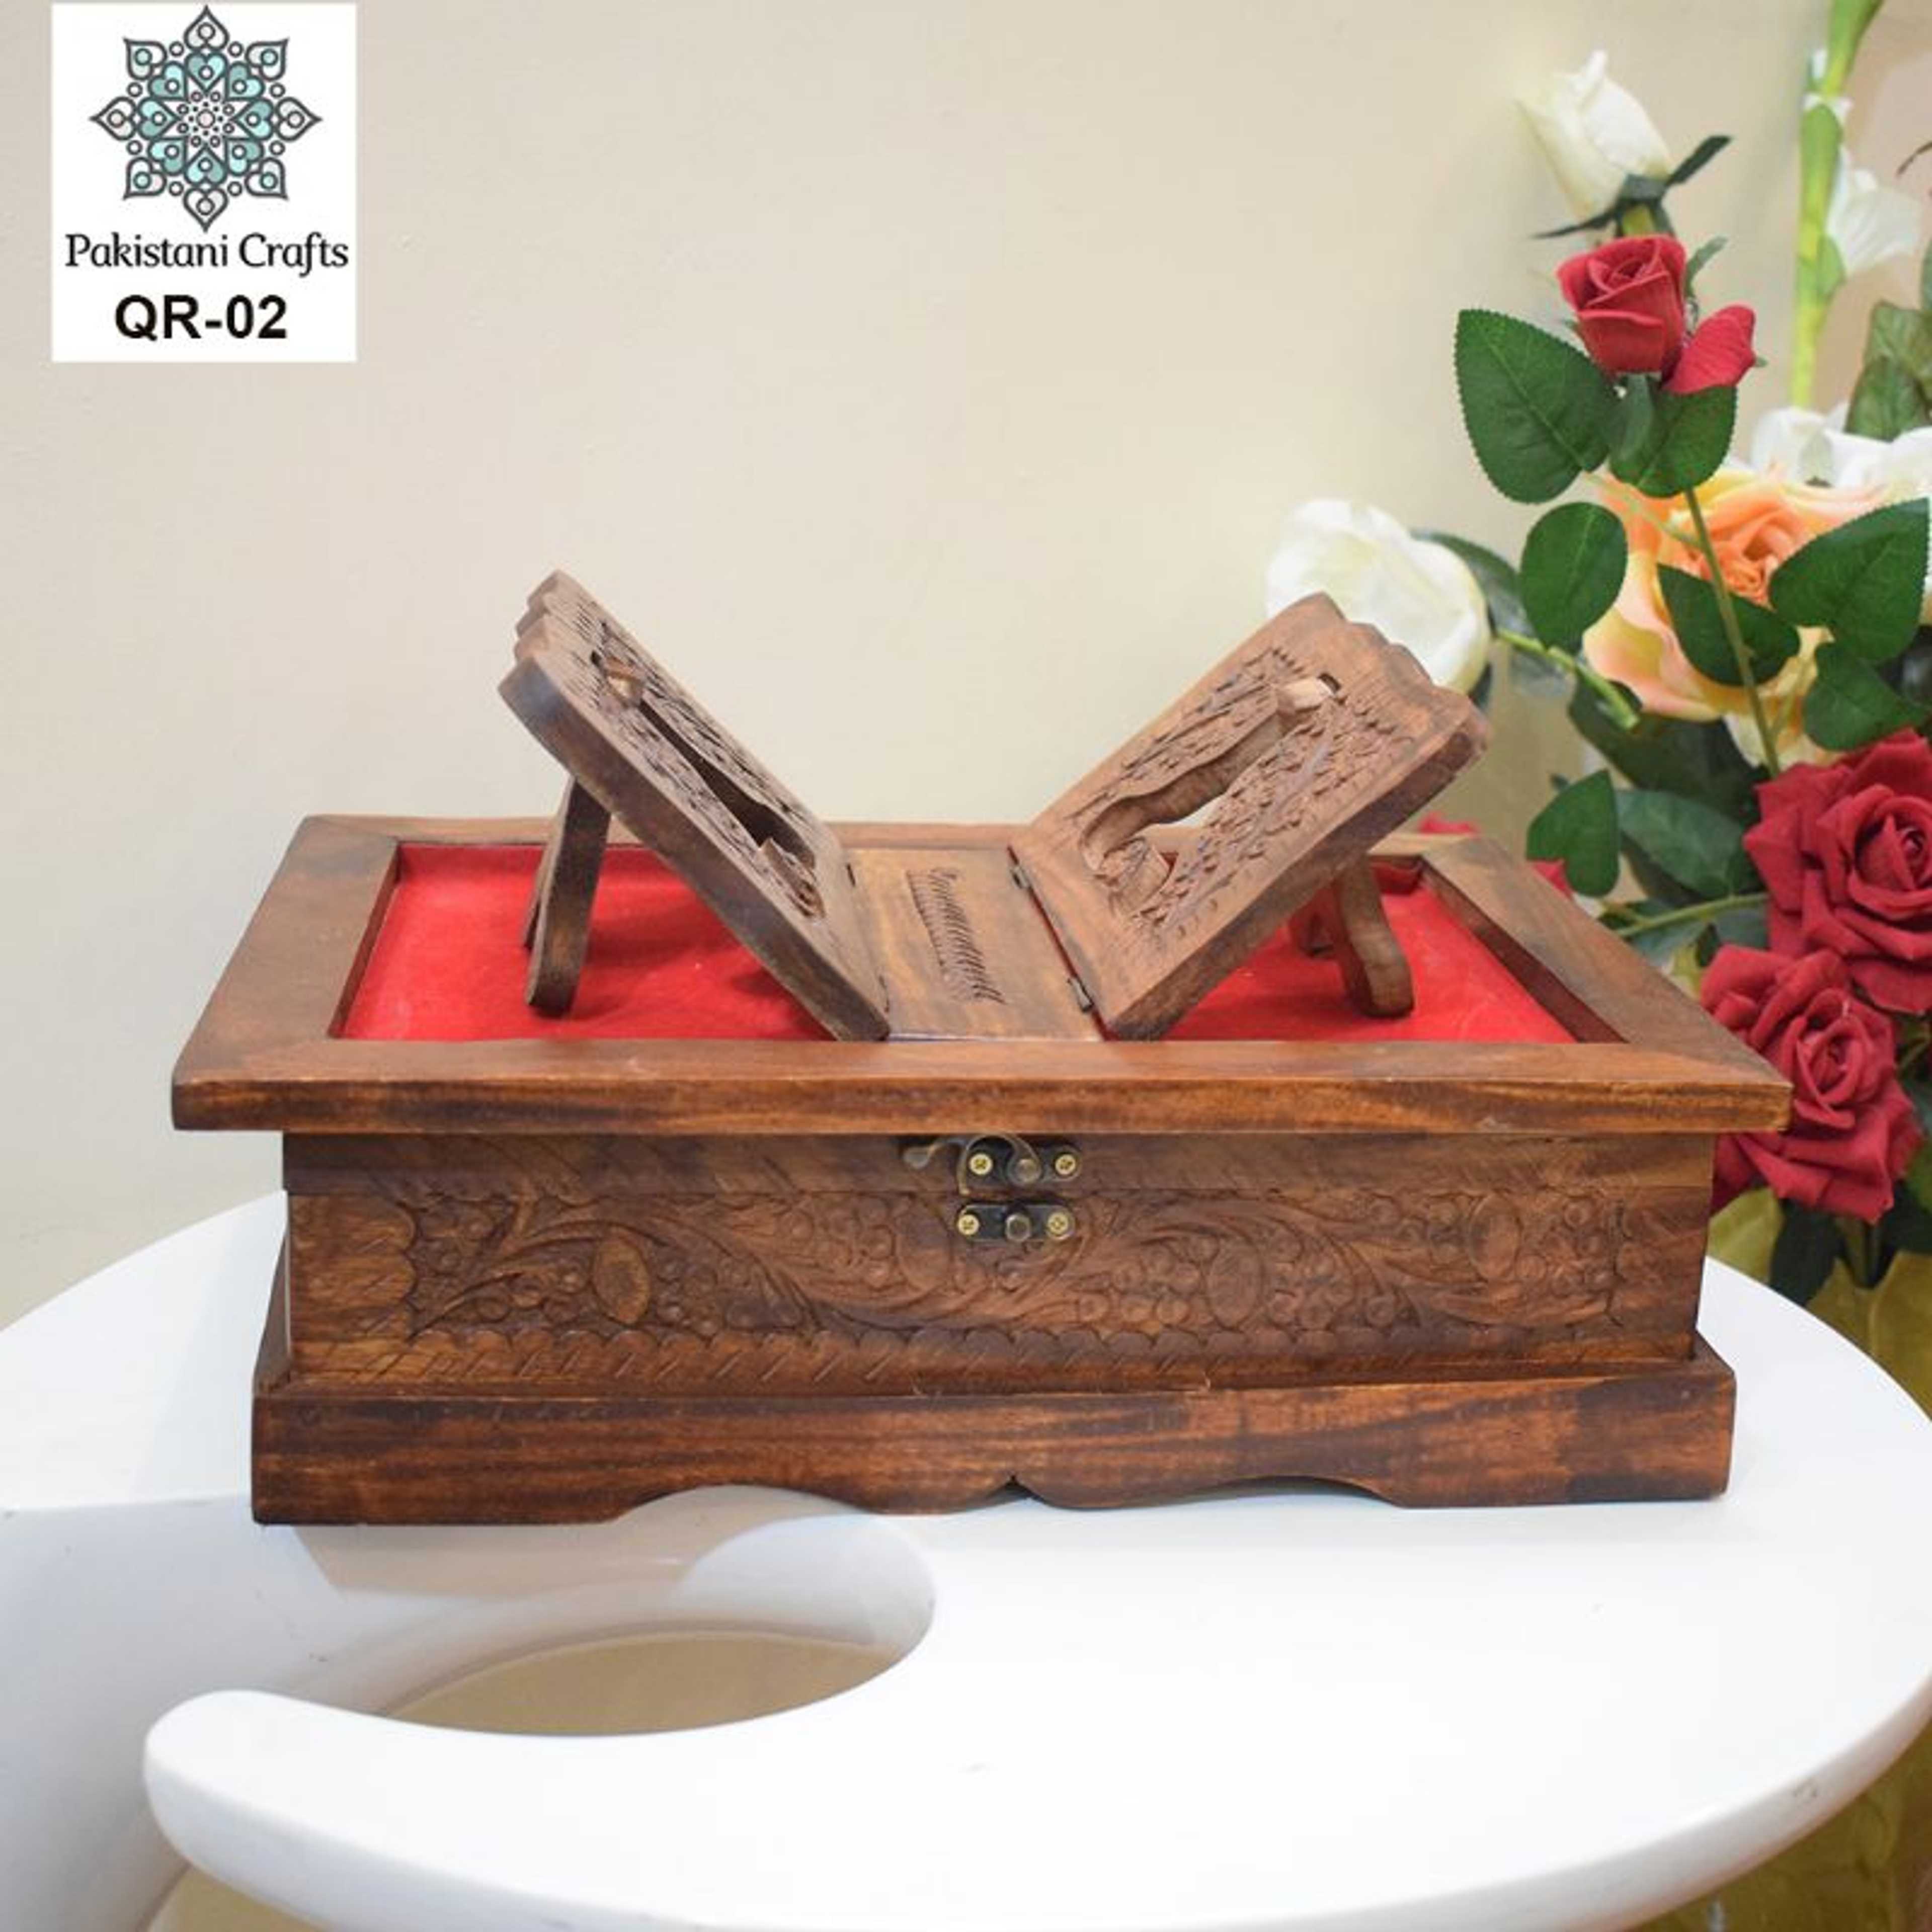 Wooden Quran Box & Rail With Carving Art Work